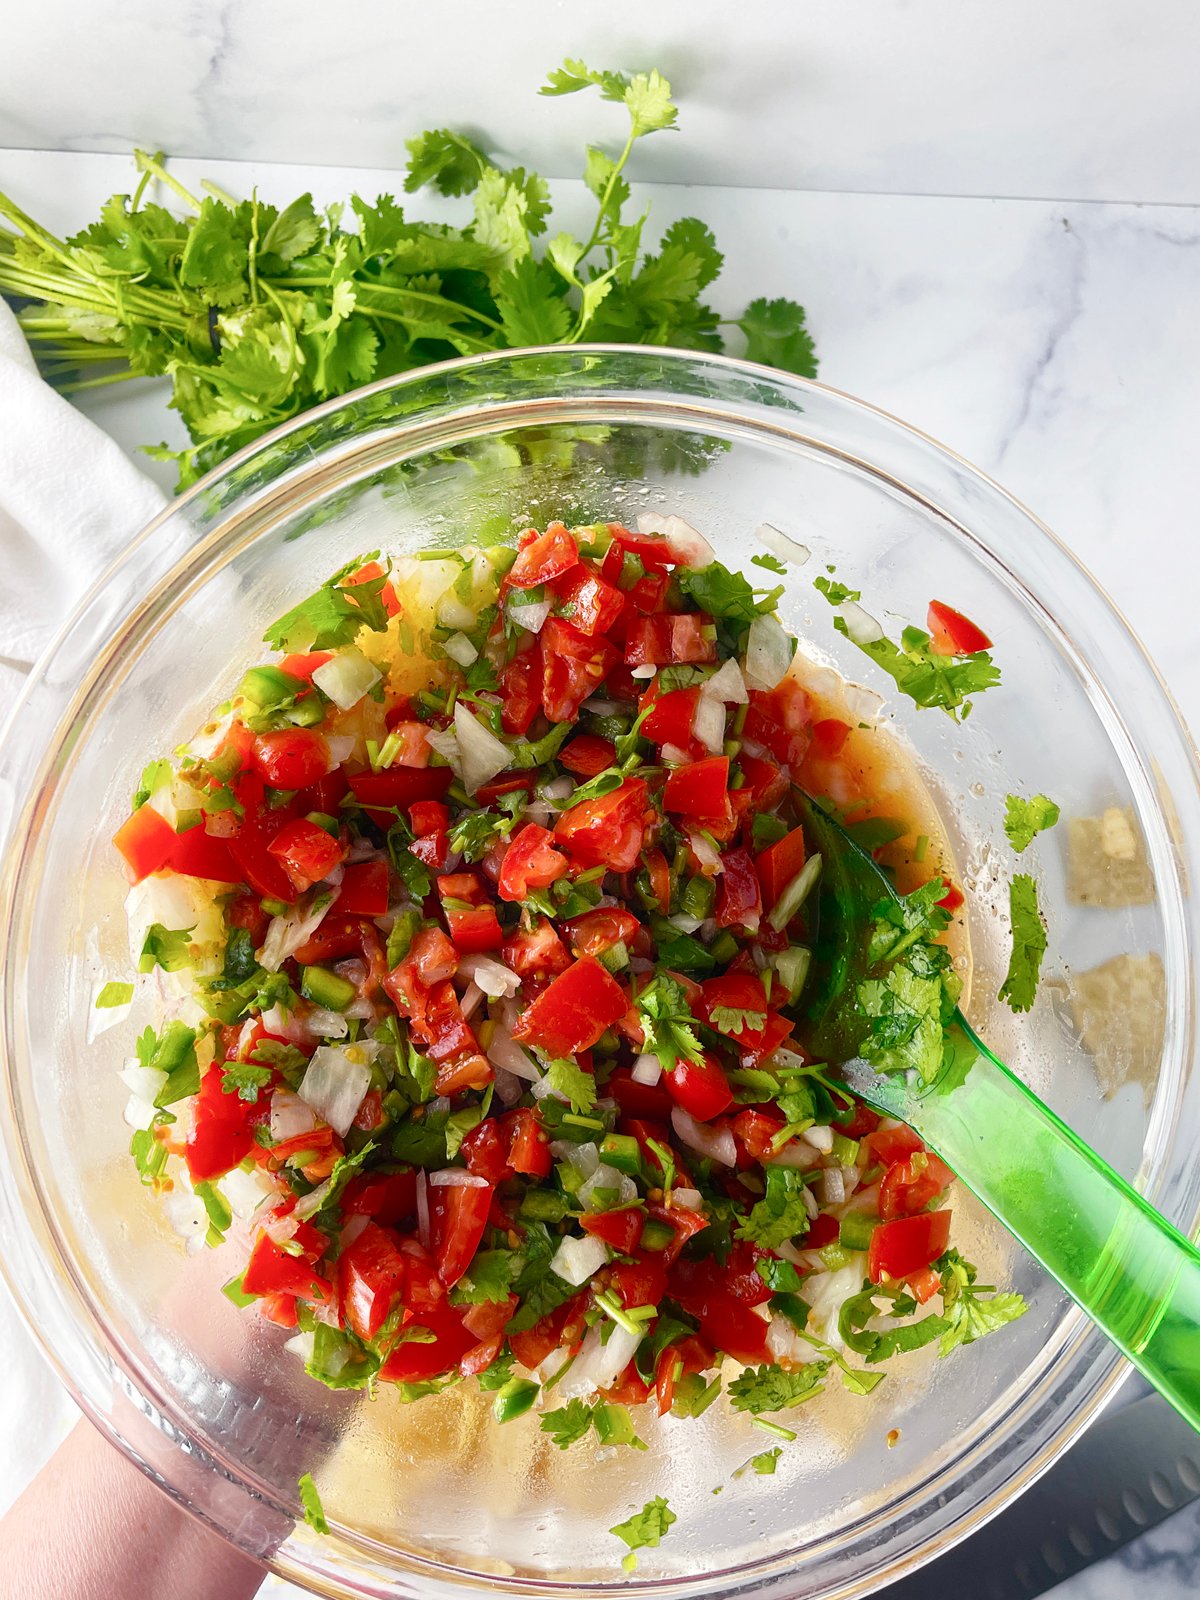 Delicious homemade salsa in a glass bowl.